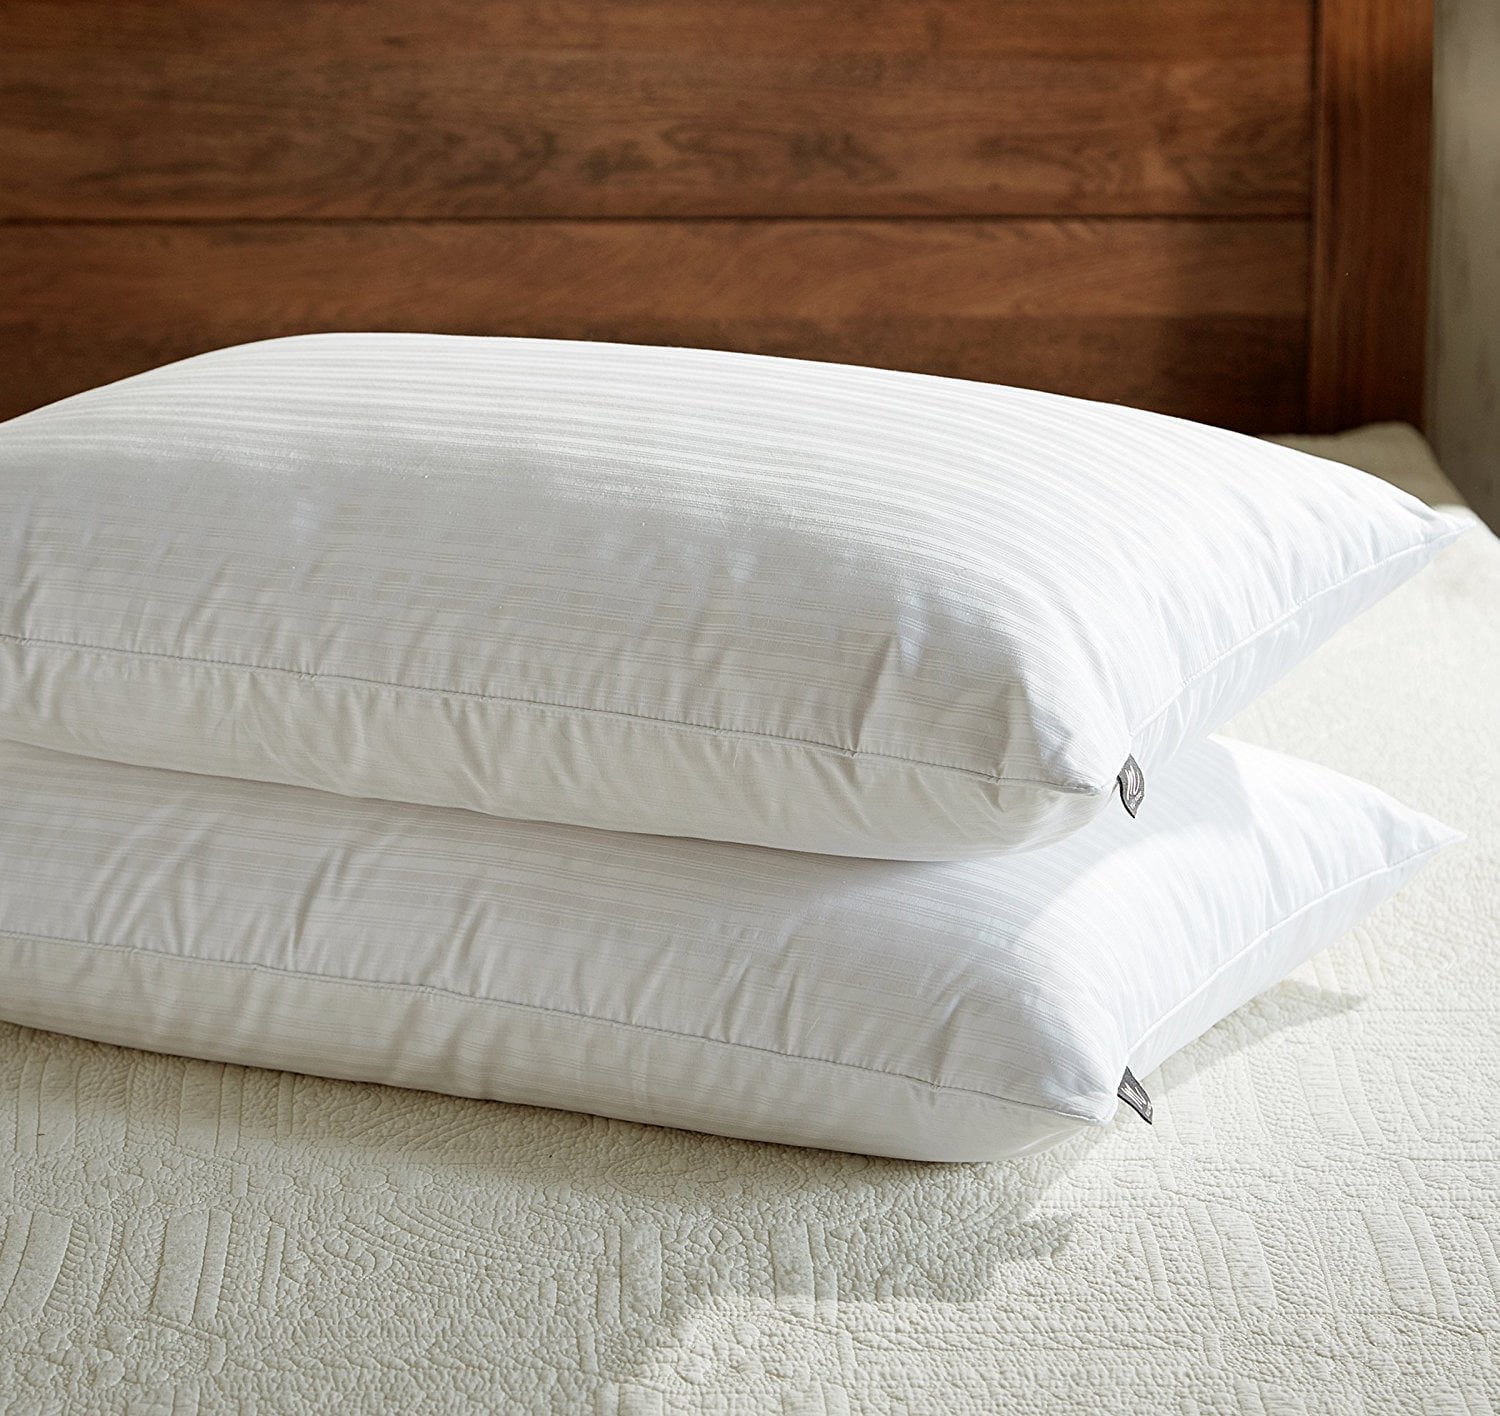 Luxurious White Down and Feather Pillow for Sleeping,100% Egyptian Cotton 2-pack 